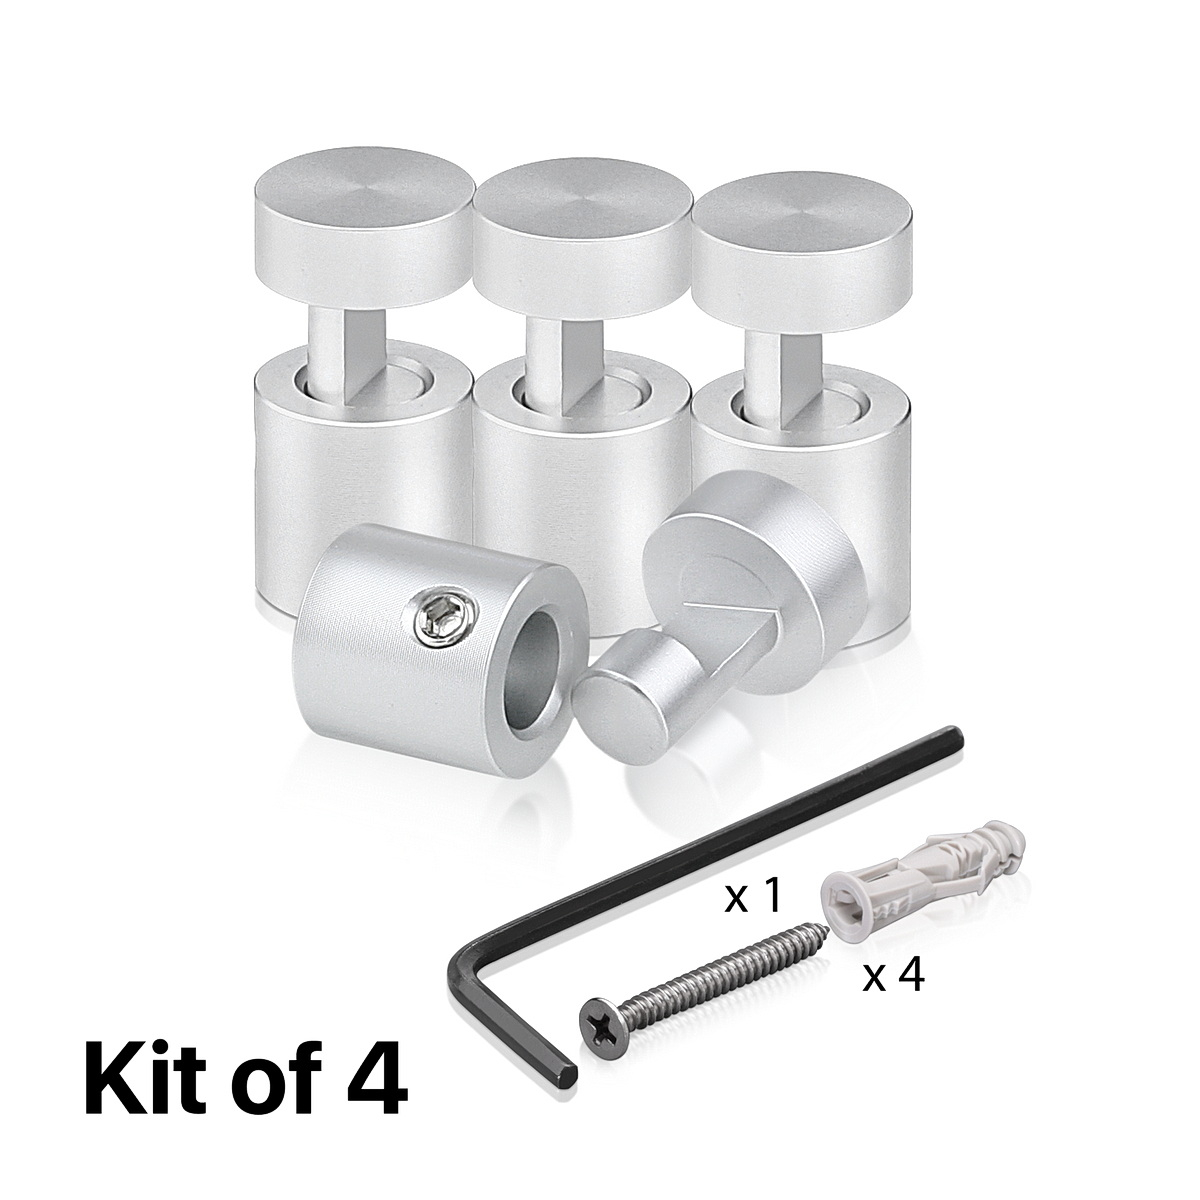 (Set of 4) 1/2'' Diameter X 1/2'' Barrel Length, Aluminum Clear Anodized Finish. Adjustable Edge Grip Standoff with (4) 2208Z Screw and (4) LANC1 Anchor  for concrete/drywall (For Inside Use Only)